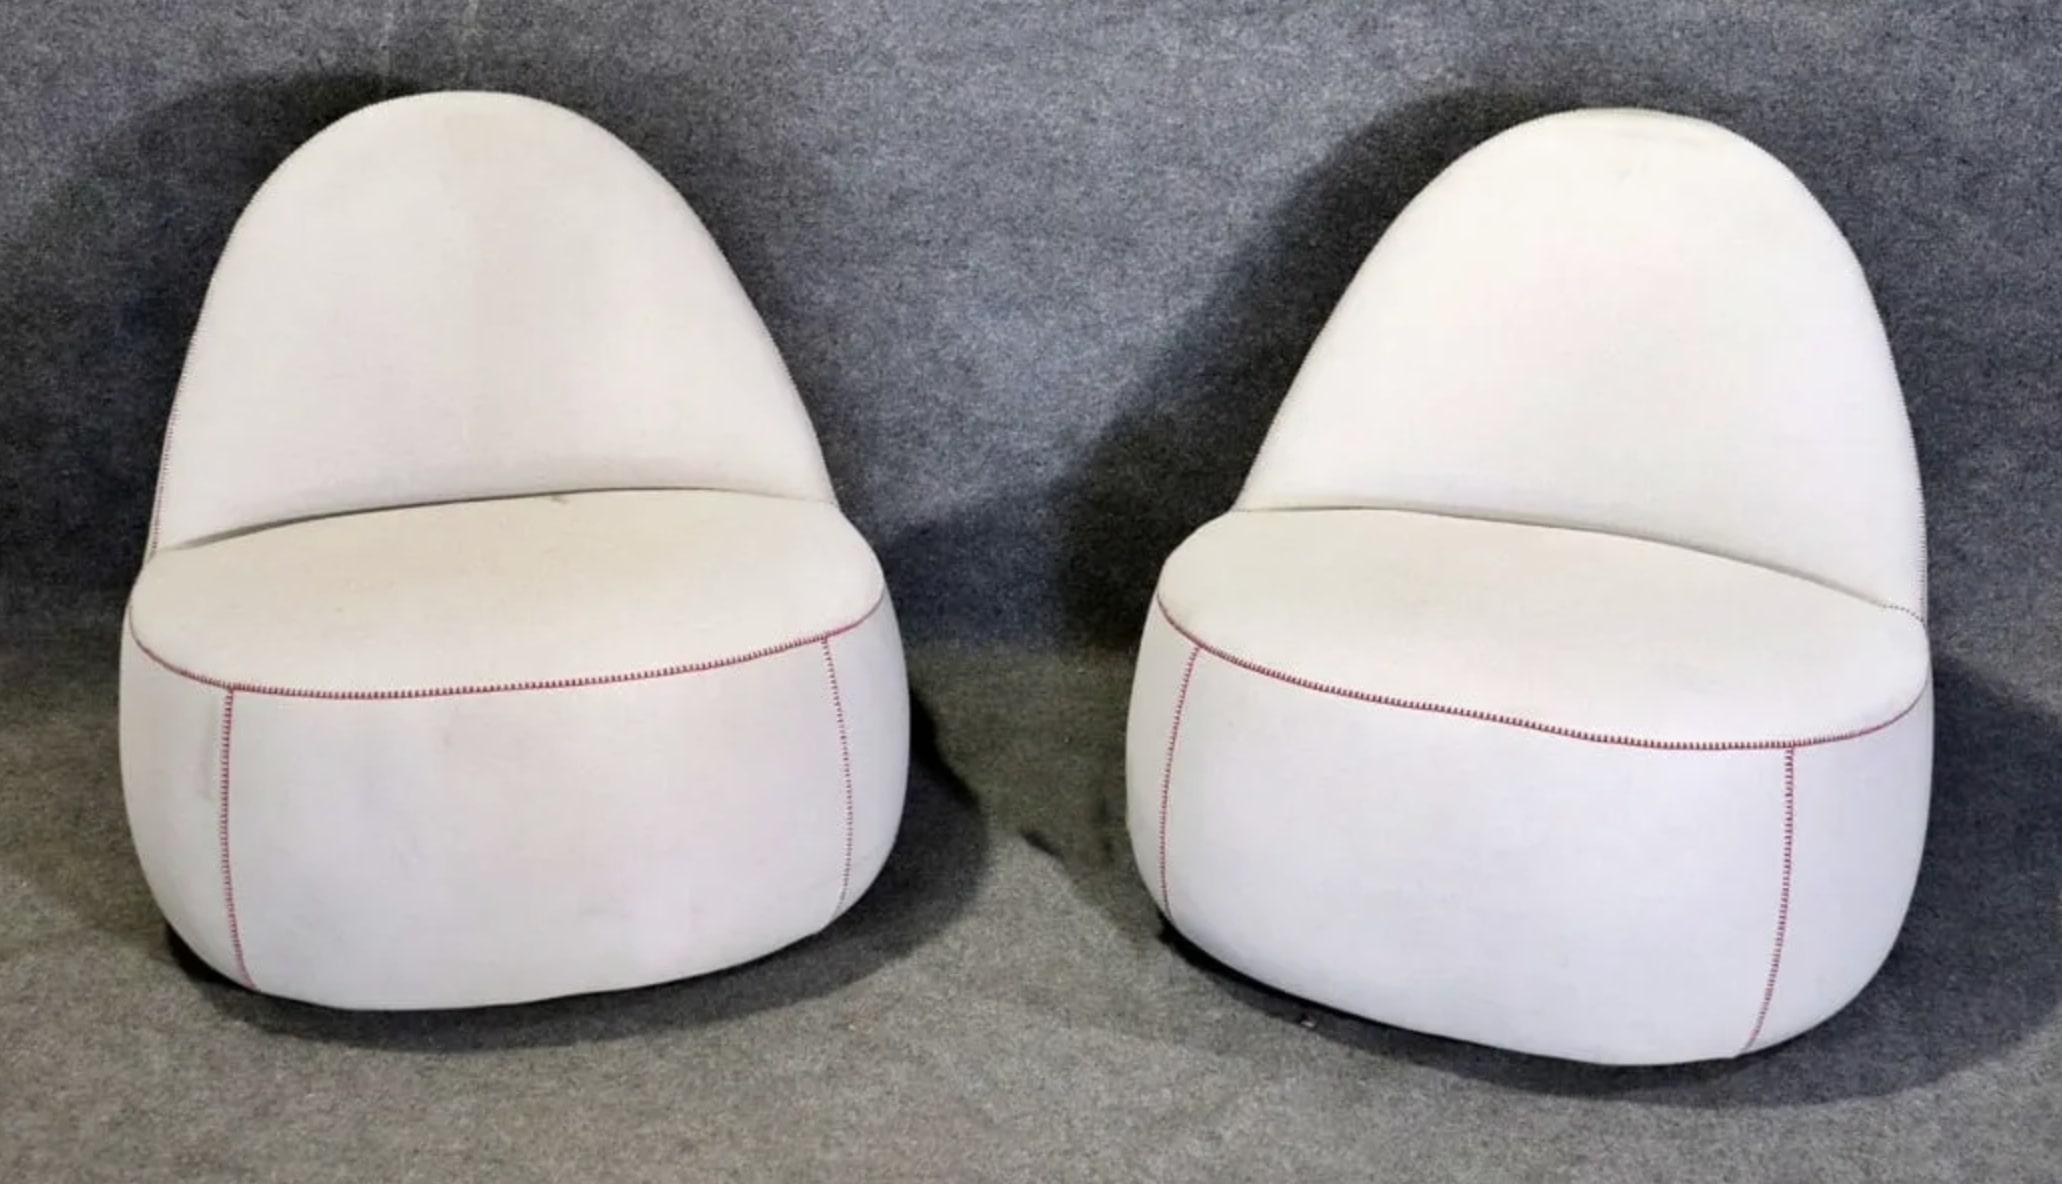 Uniquely designed lounge chairs by Bernhardt Design. Called the Mitt chair, and made in the form of a mitten. Simple and modern design for your home.
Please confirm location NY or NJ